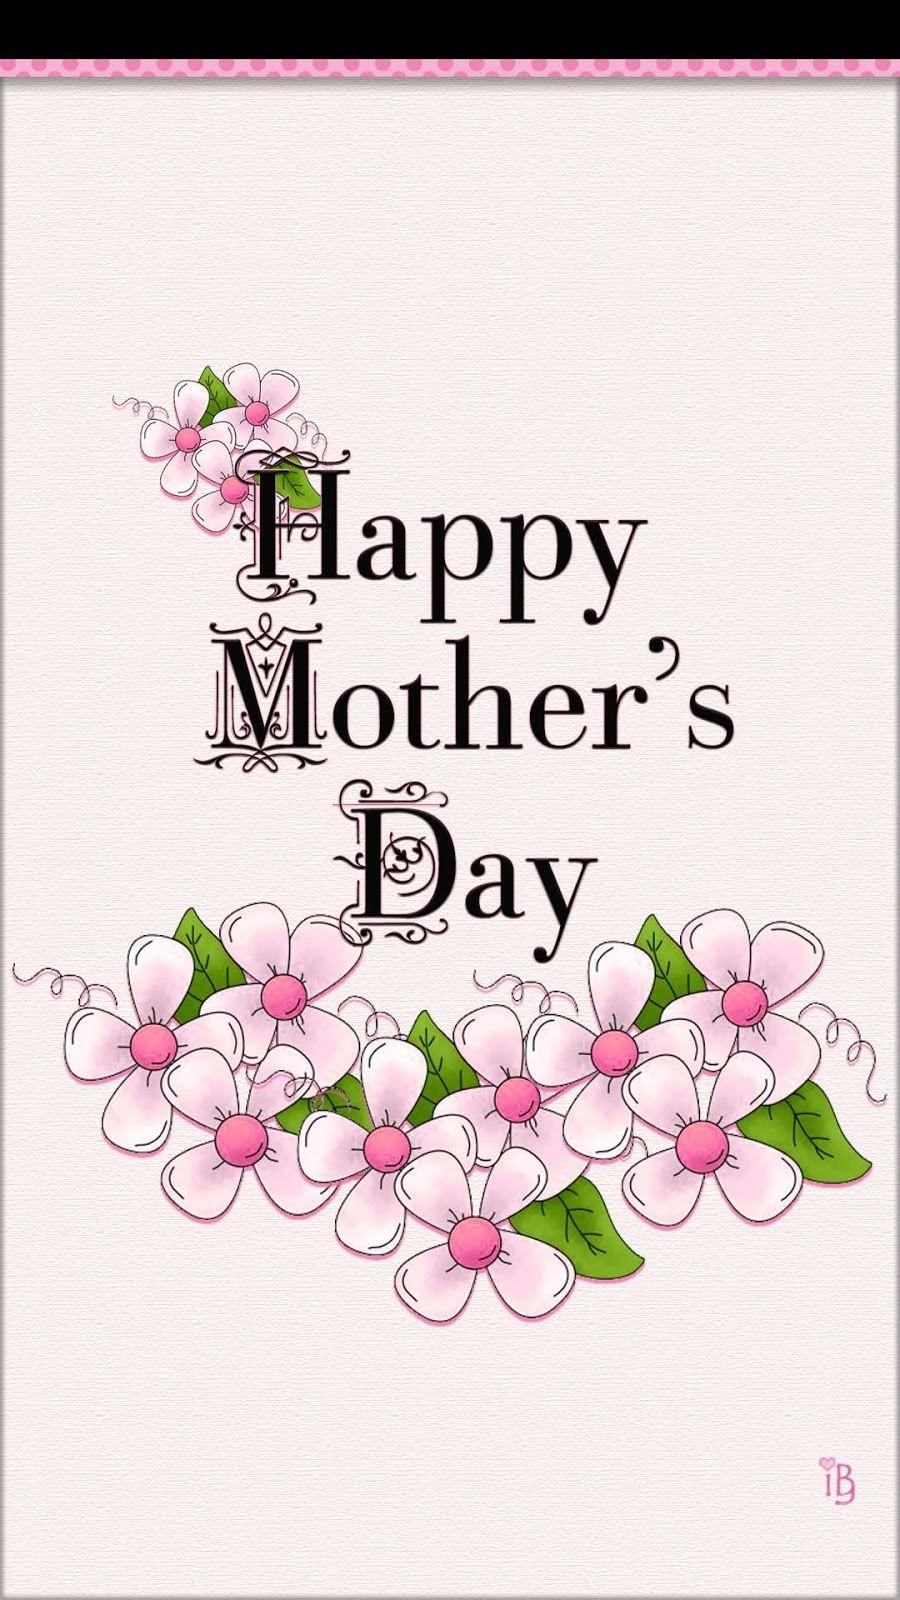 iPhone Wall's Day tjn. Happy mothers day wallpaper, Fathers day wallpaper, Mother's day background